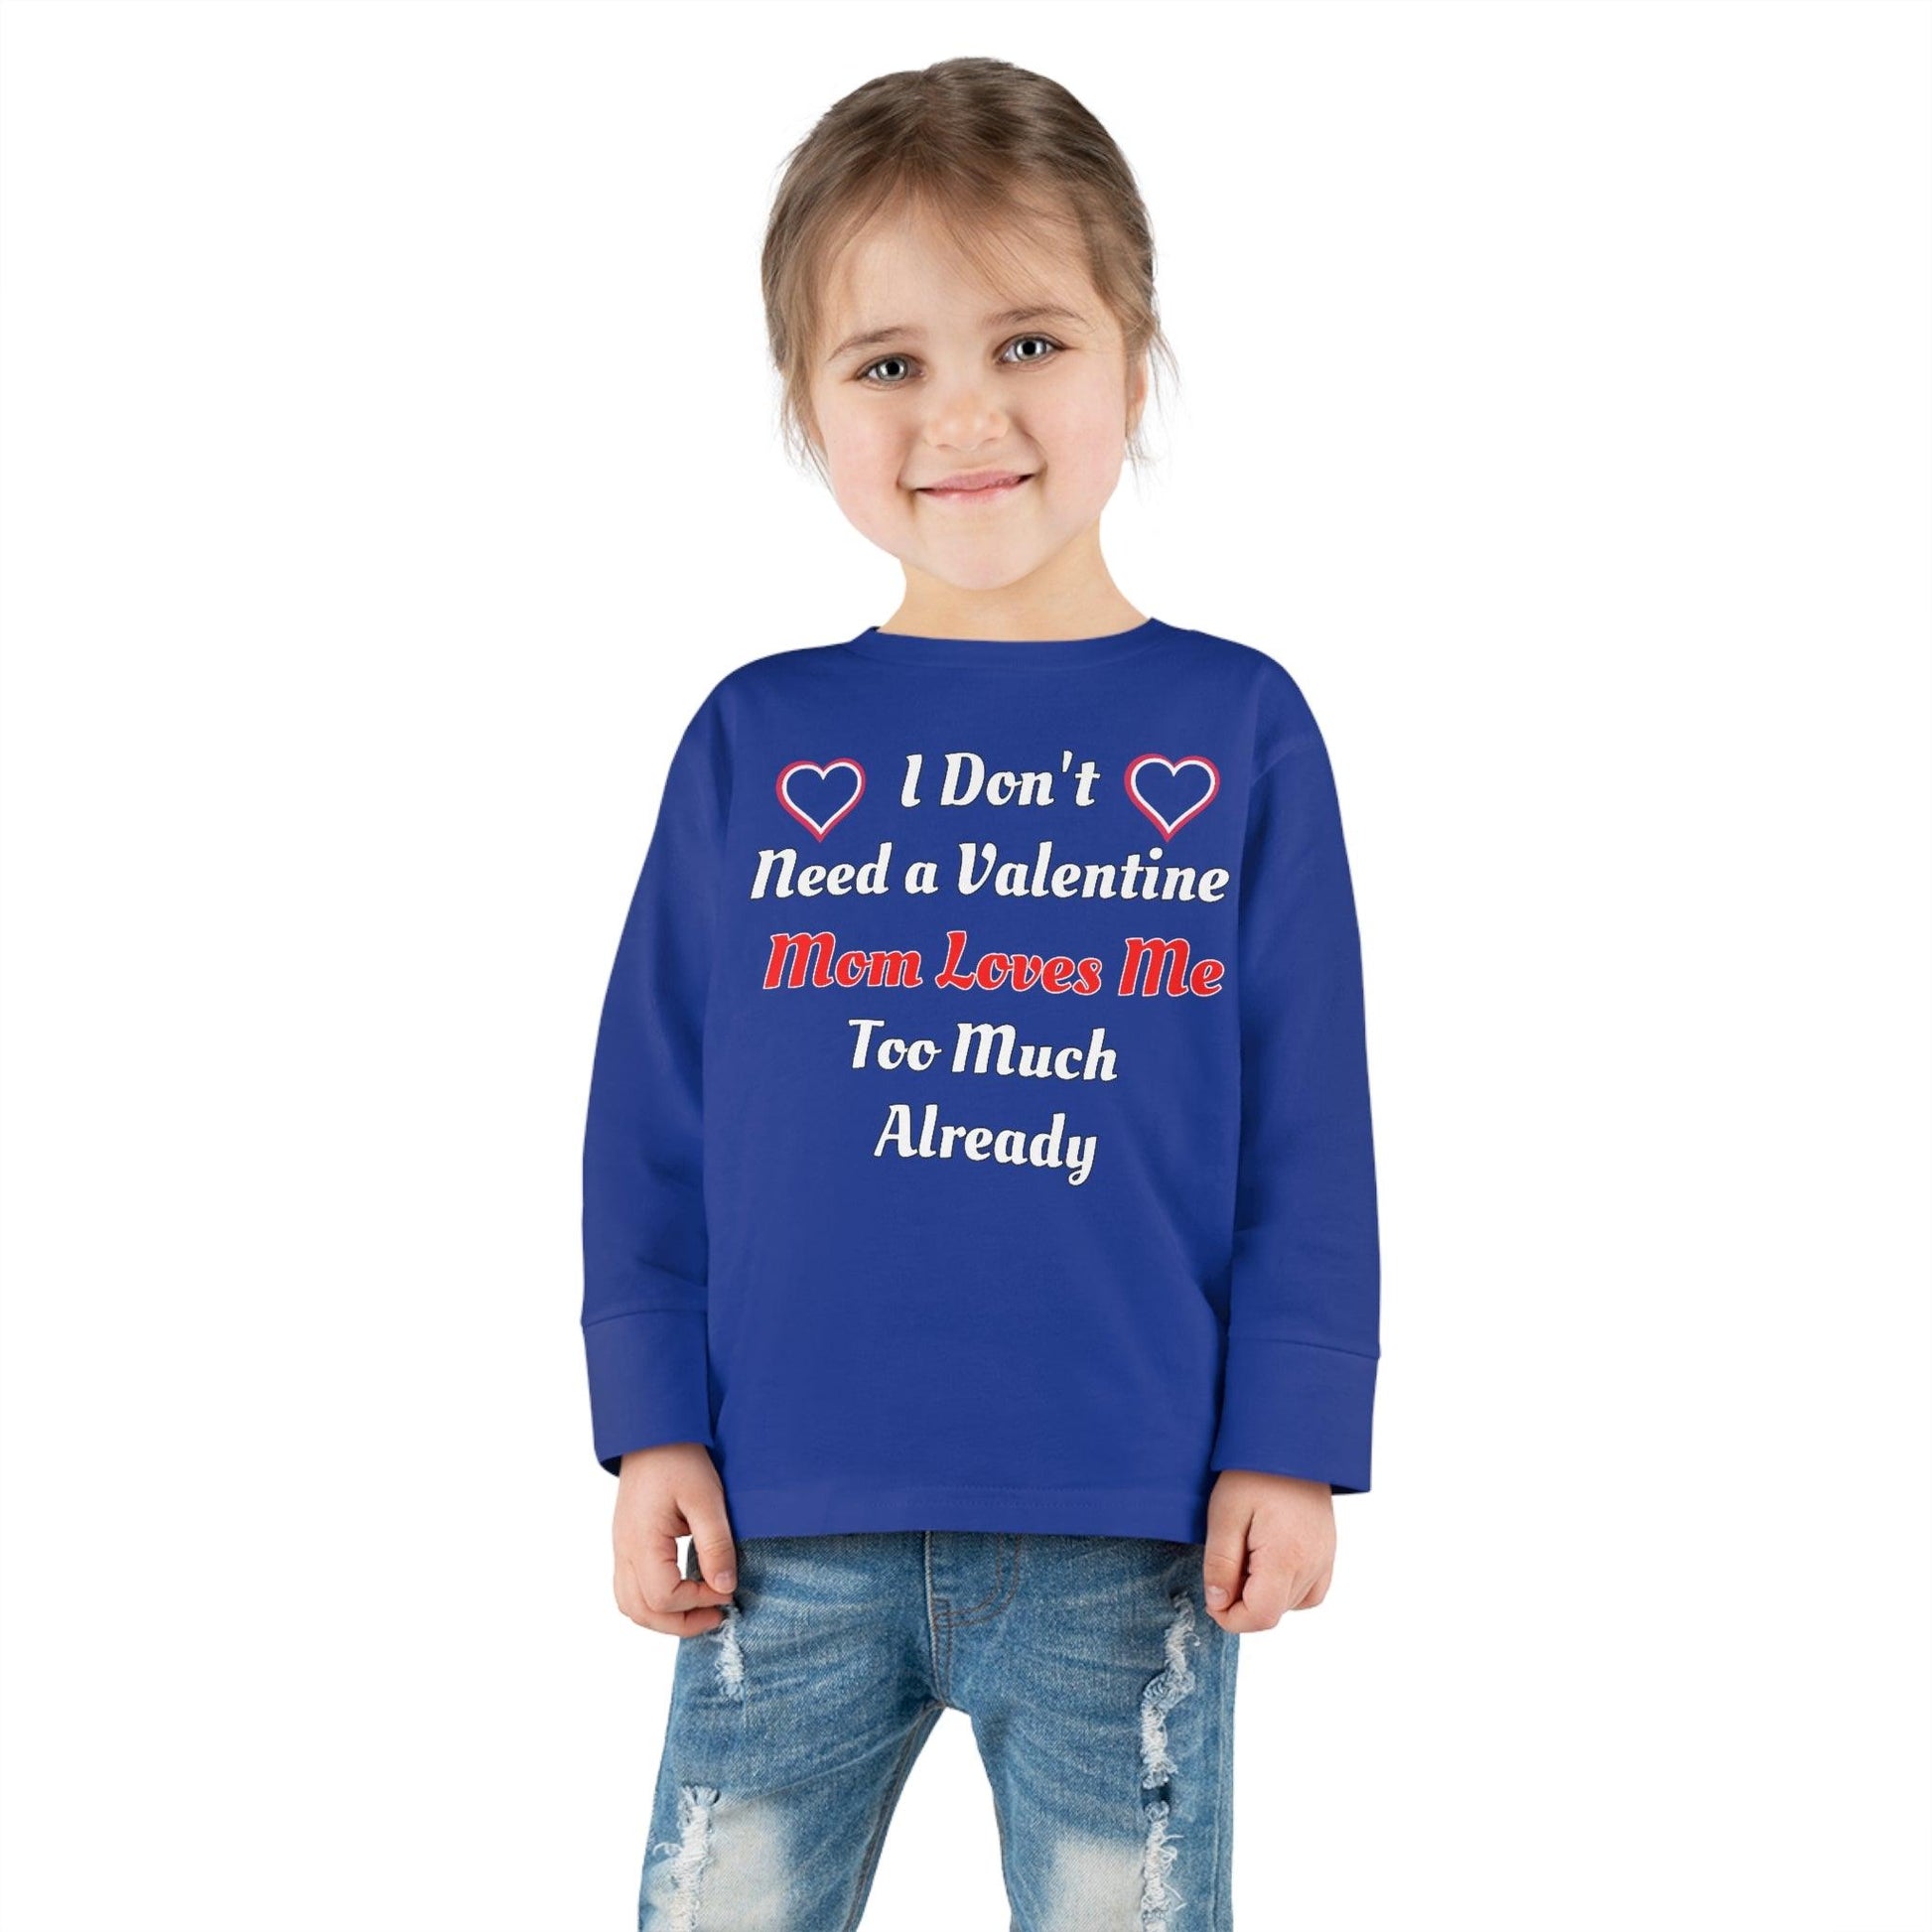 I don't need a valentine mom loves me too much already Toddler Long Sleeve Tee - Giftsmojo